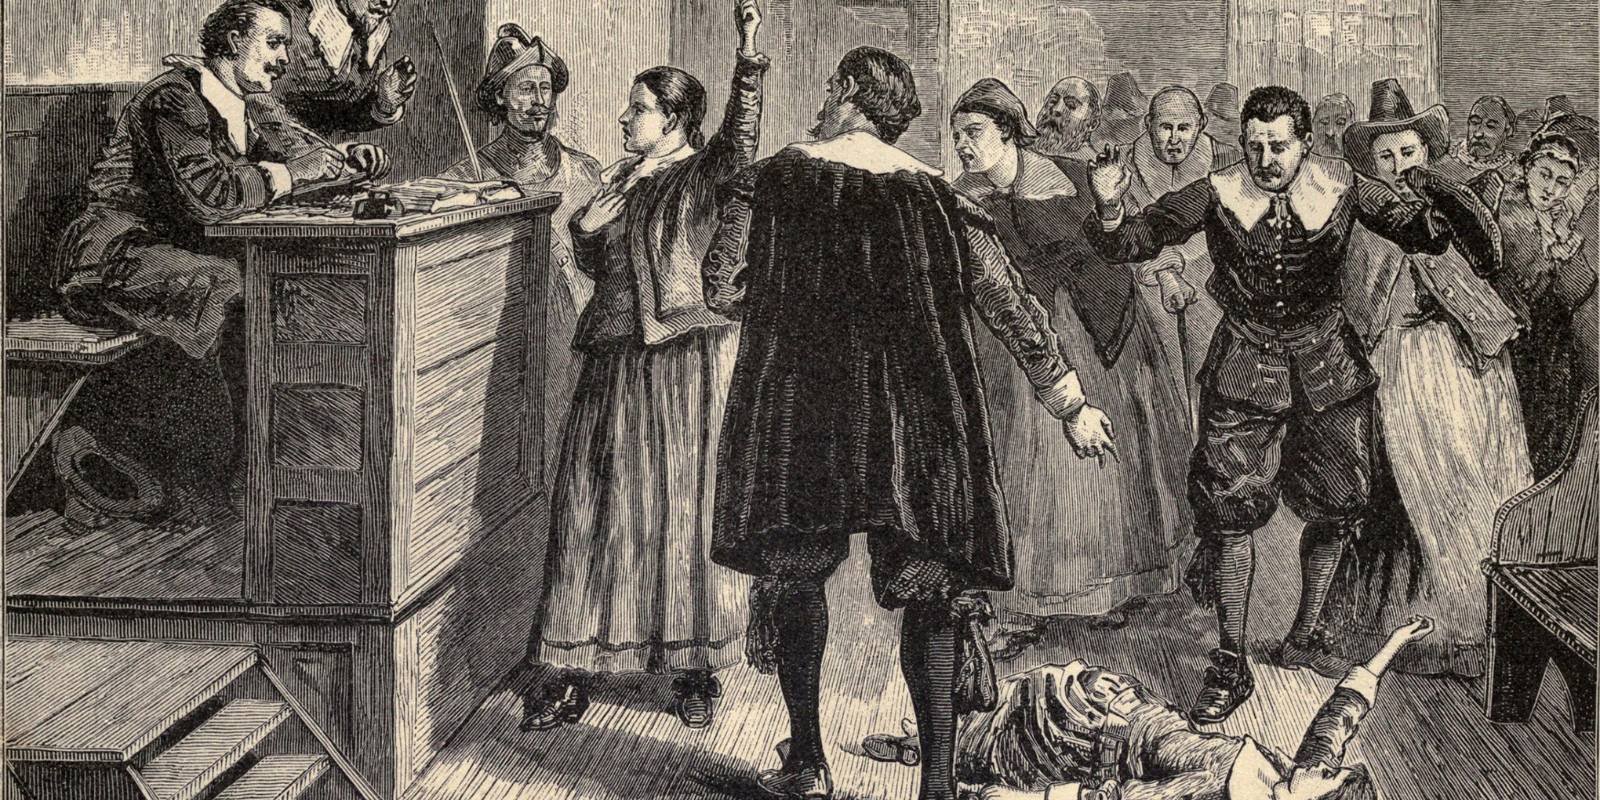 September 22nd: 8 Individuals Executed For Witchcraft